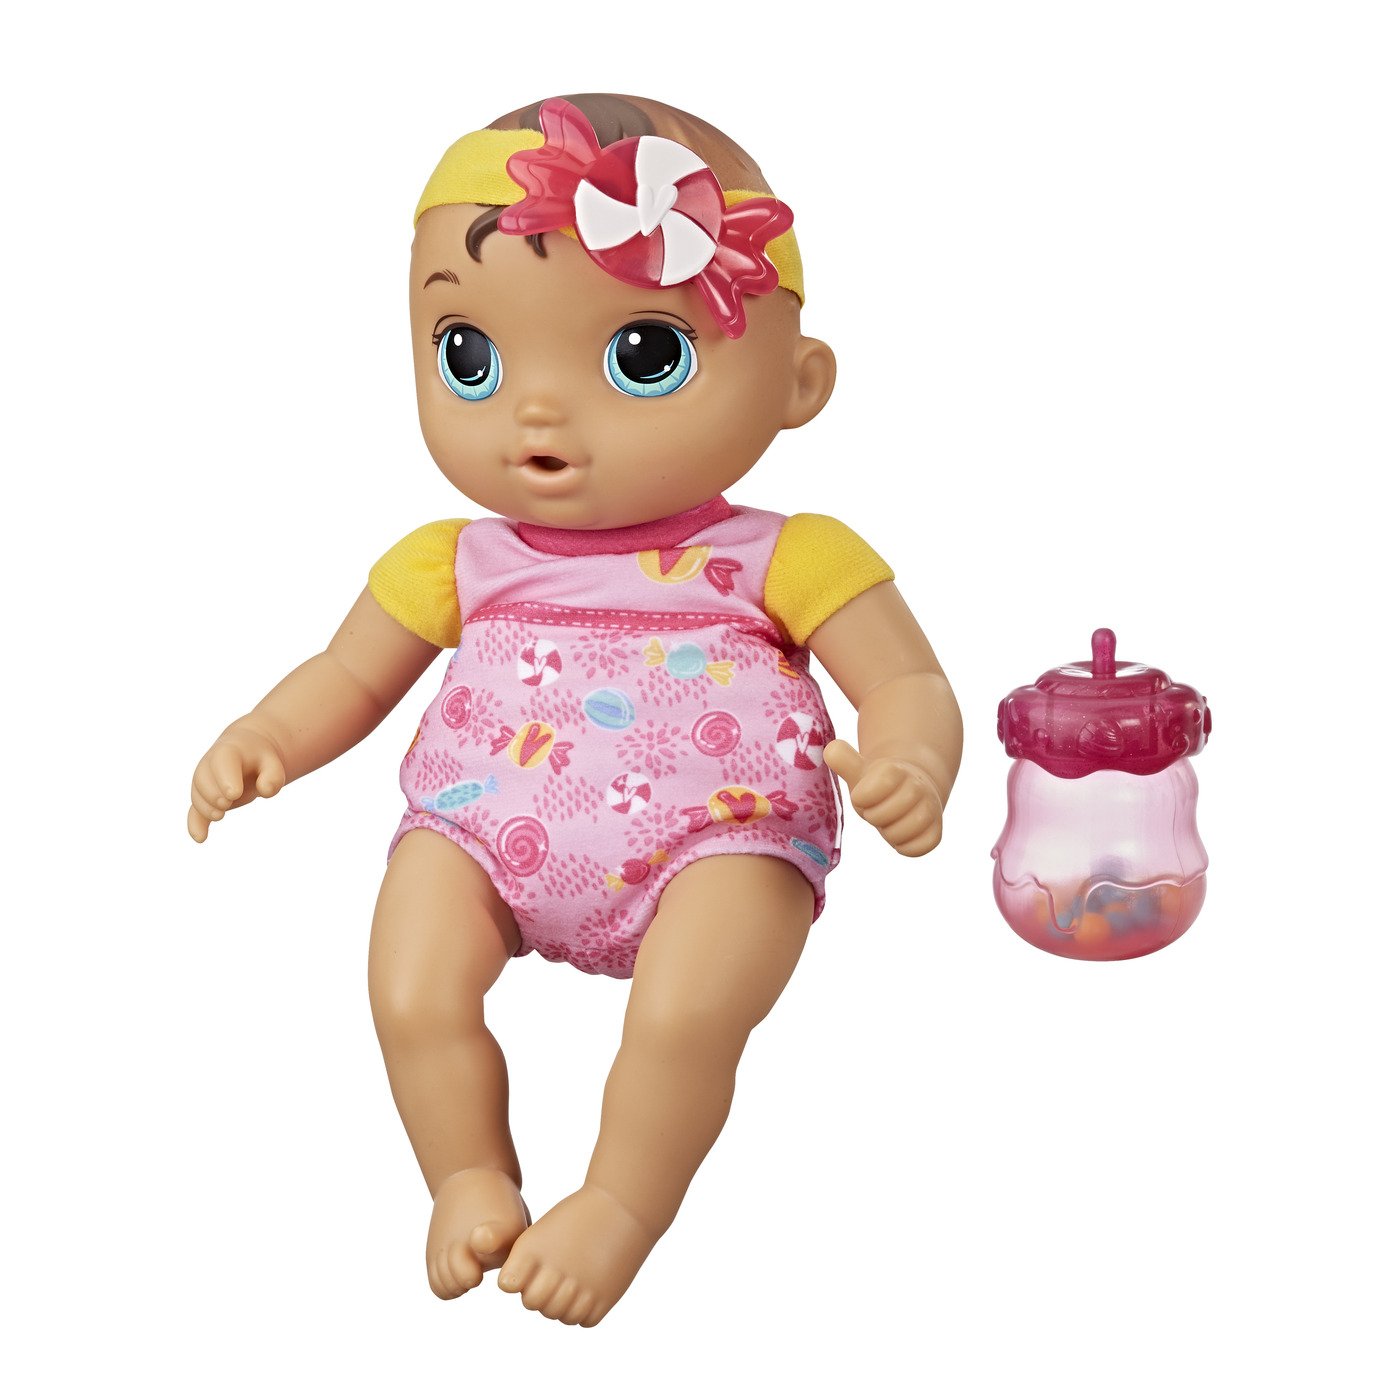 price of baby alive doll